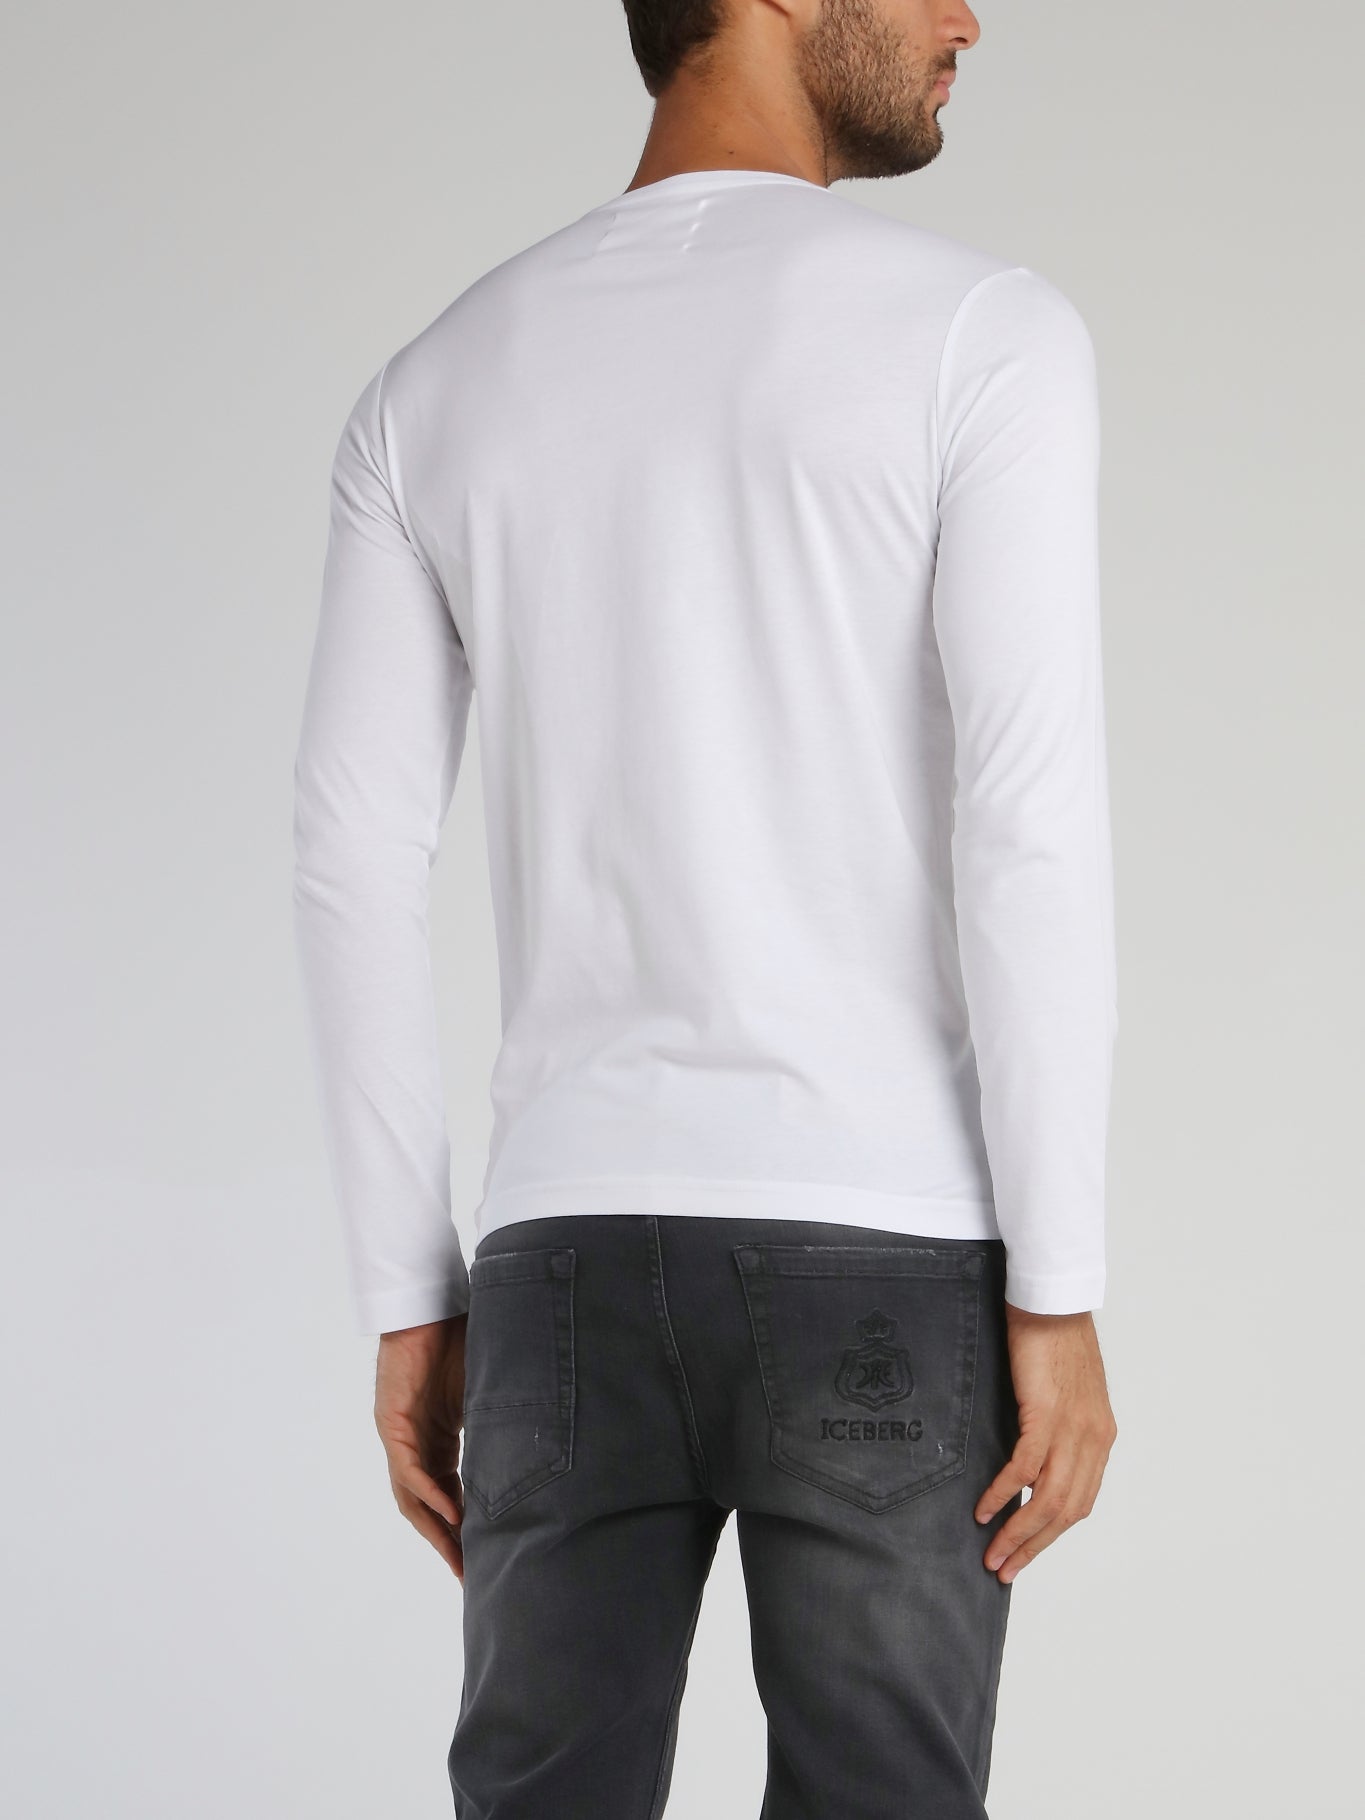 White Embroidered Long Sleeve T-Shirt